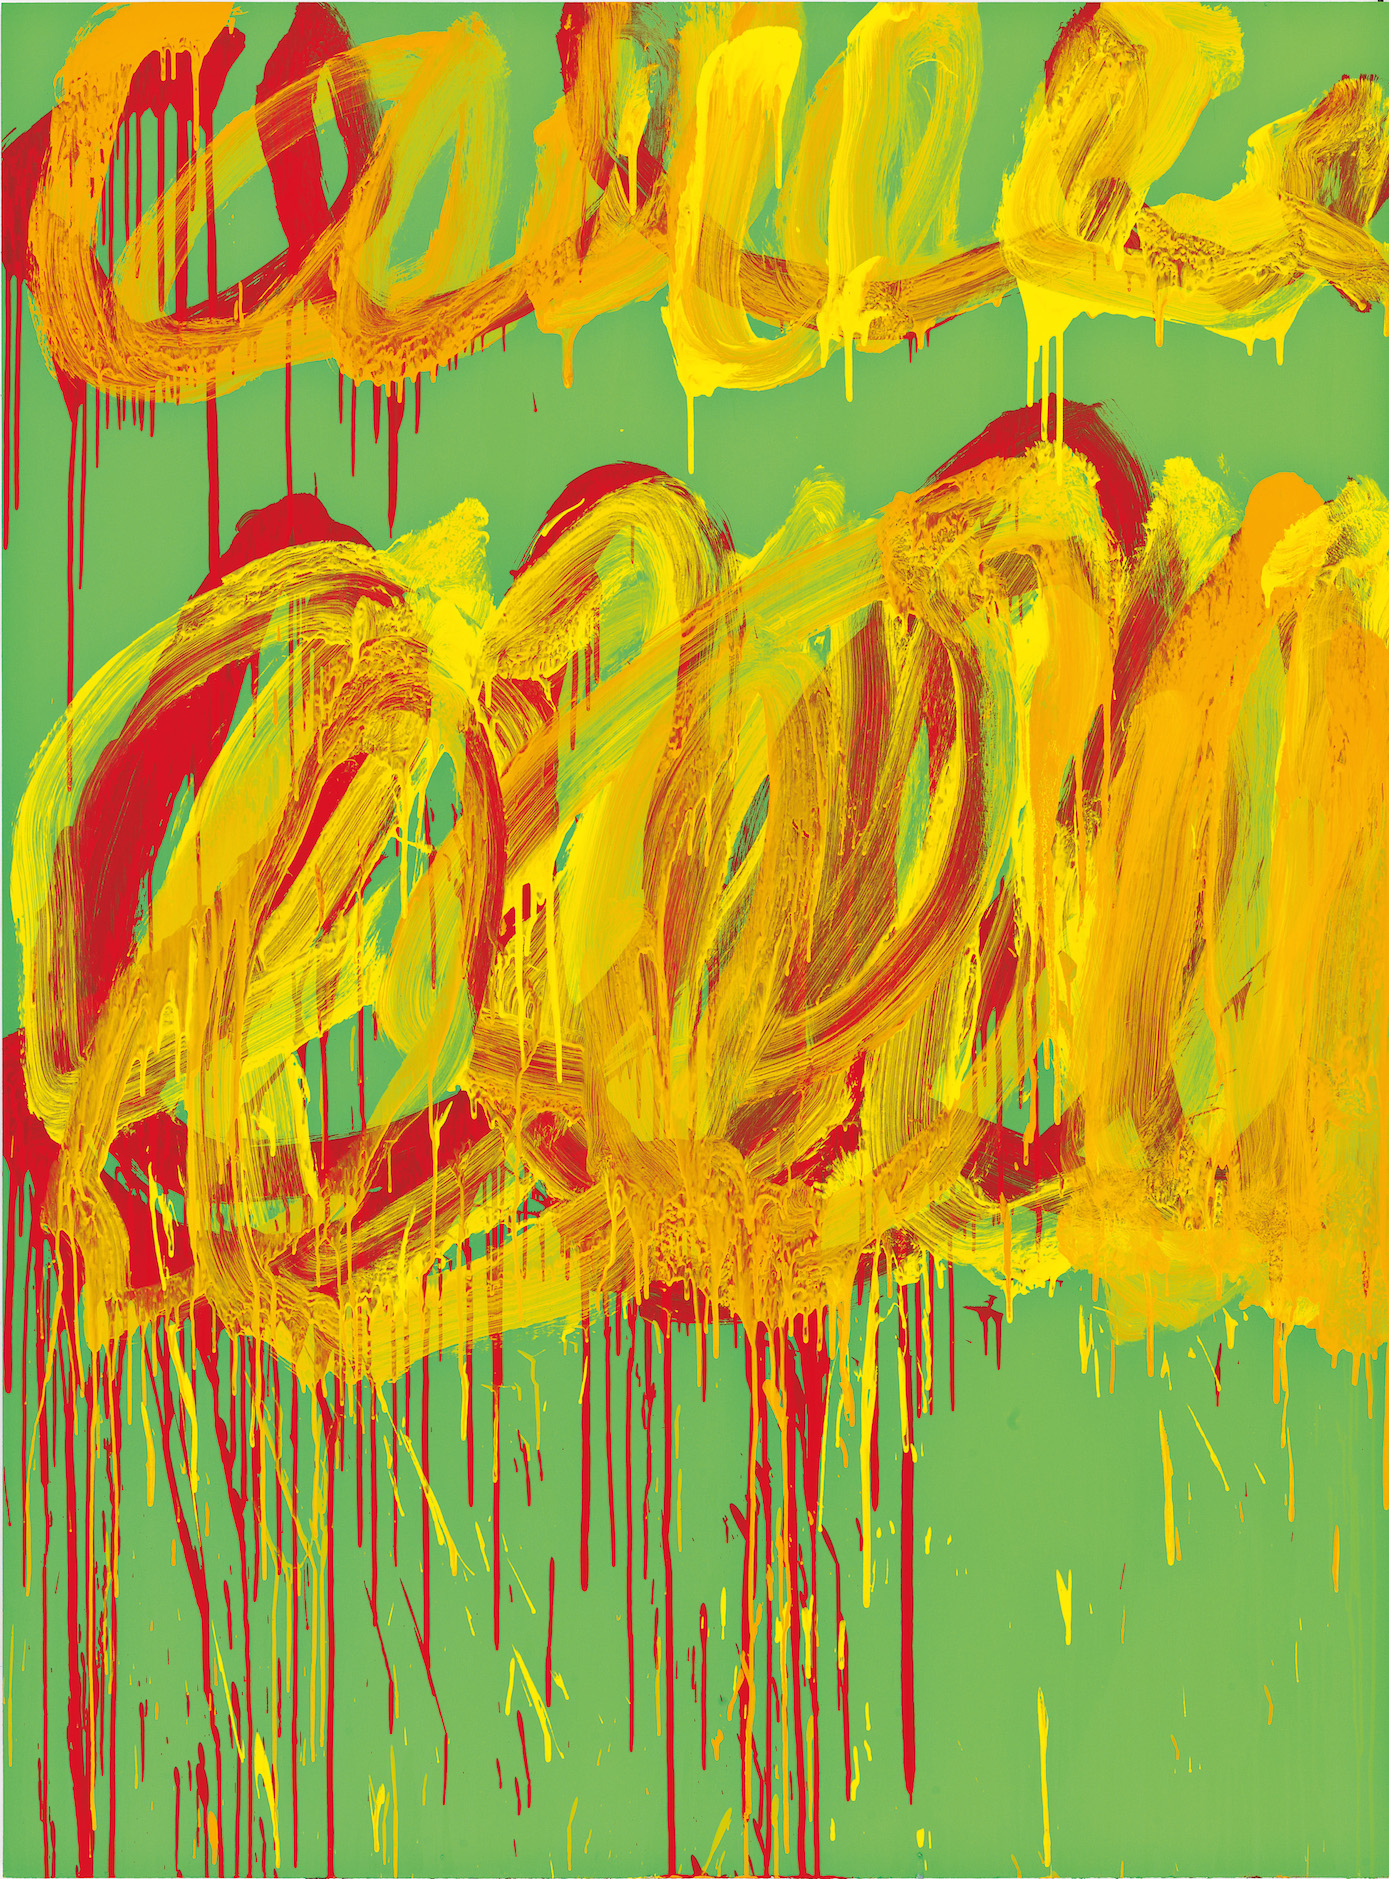 Cy Twombly, Untitled (Camino Real VI), 2011. Courtesy: Cy Twombly Foundation.